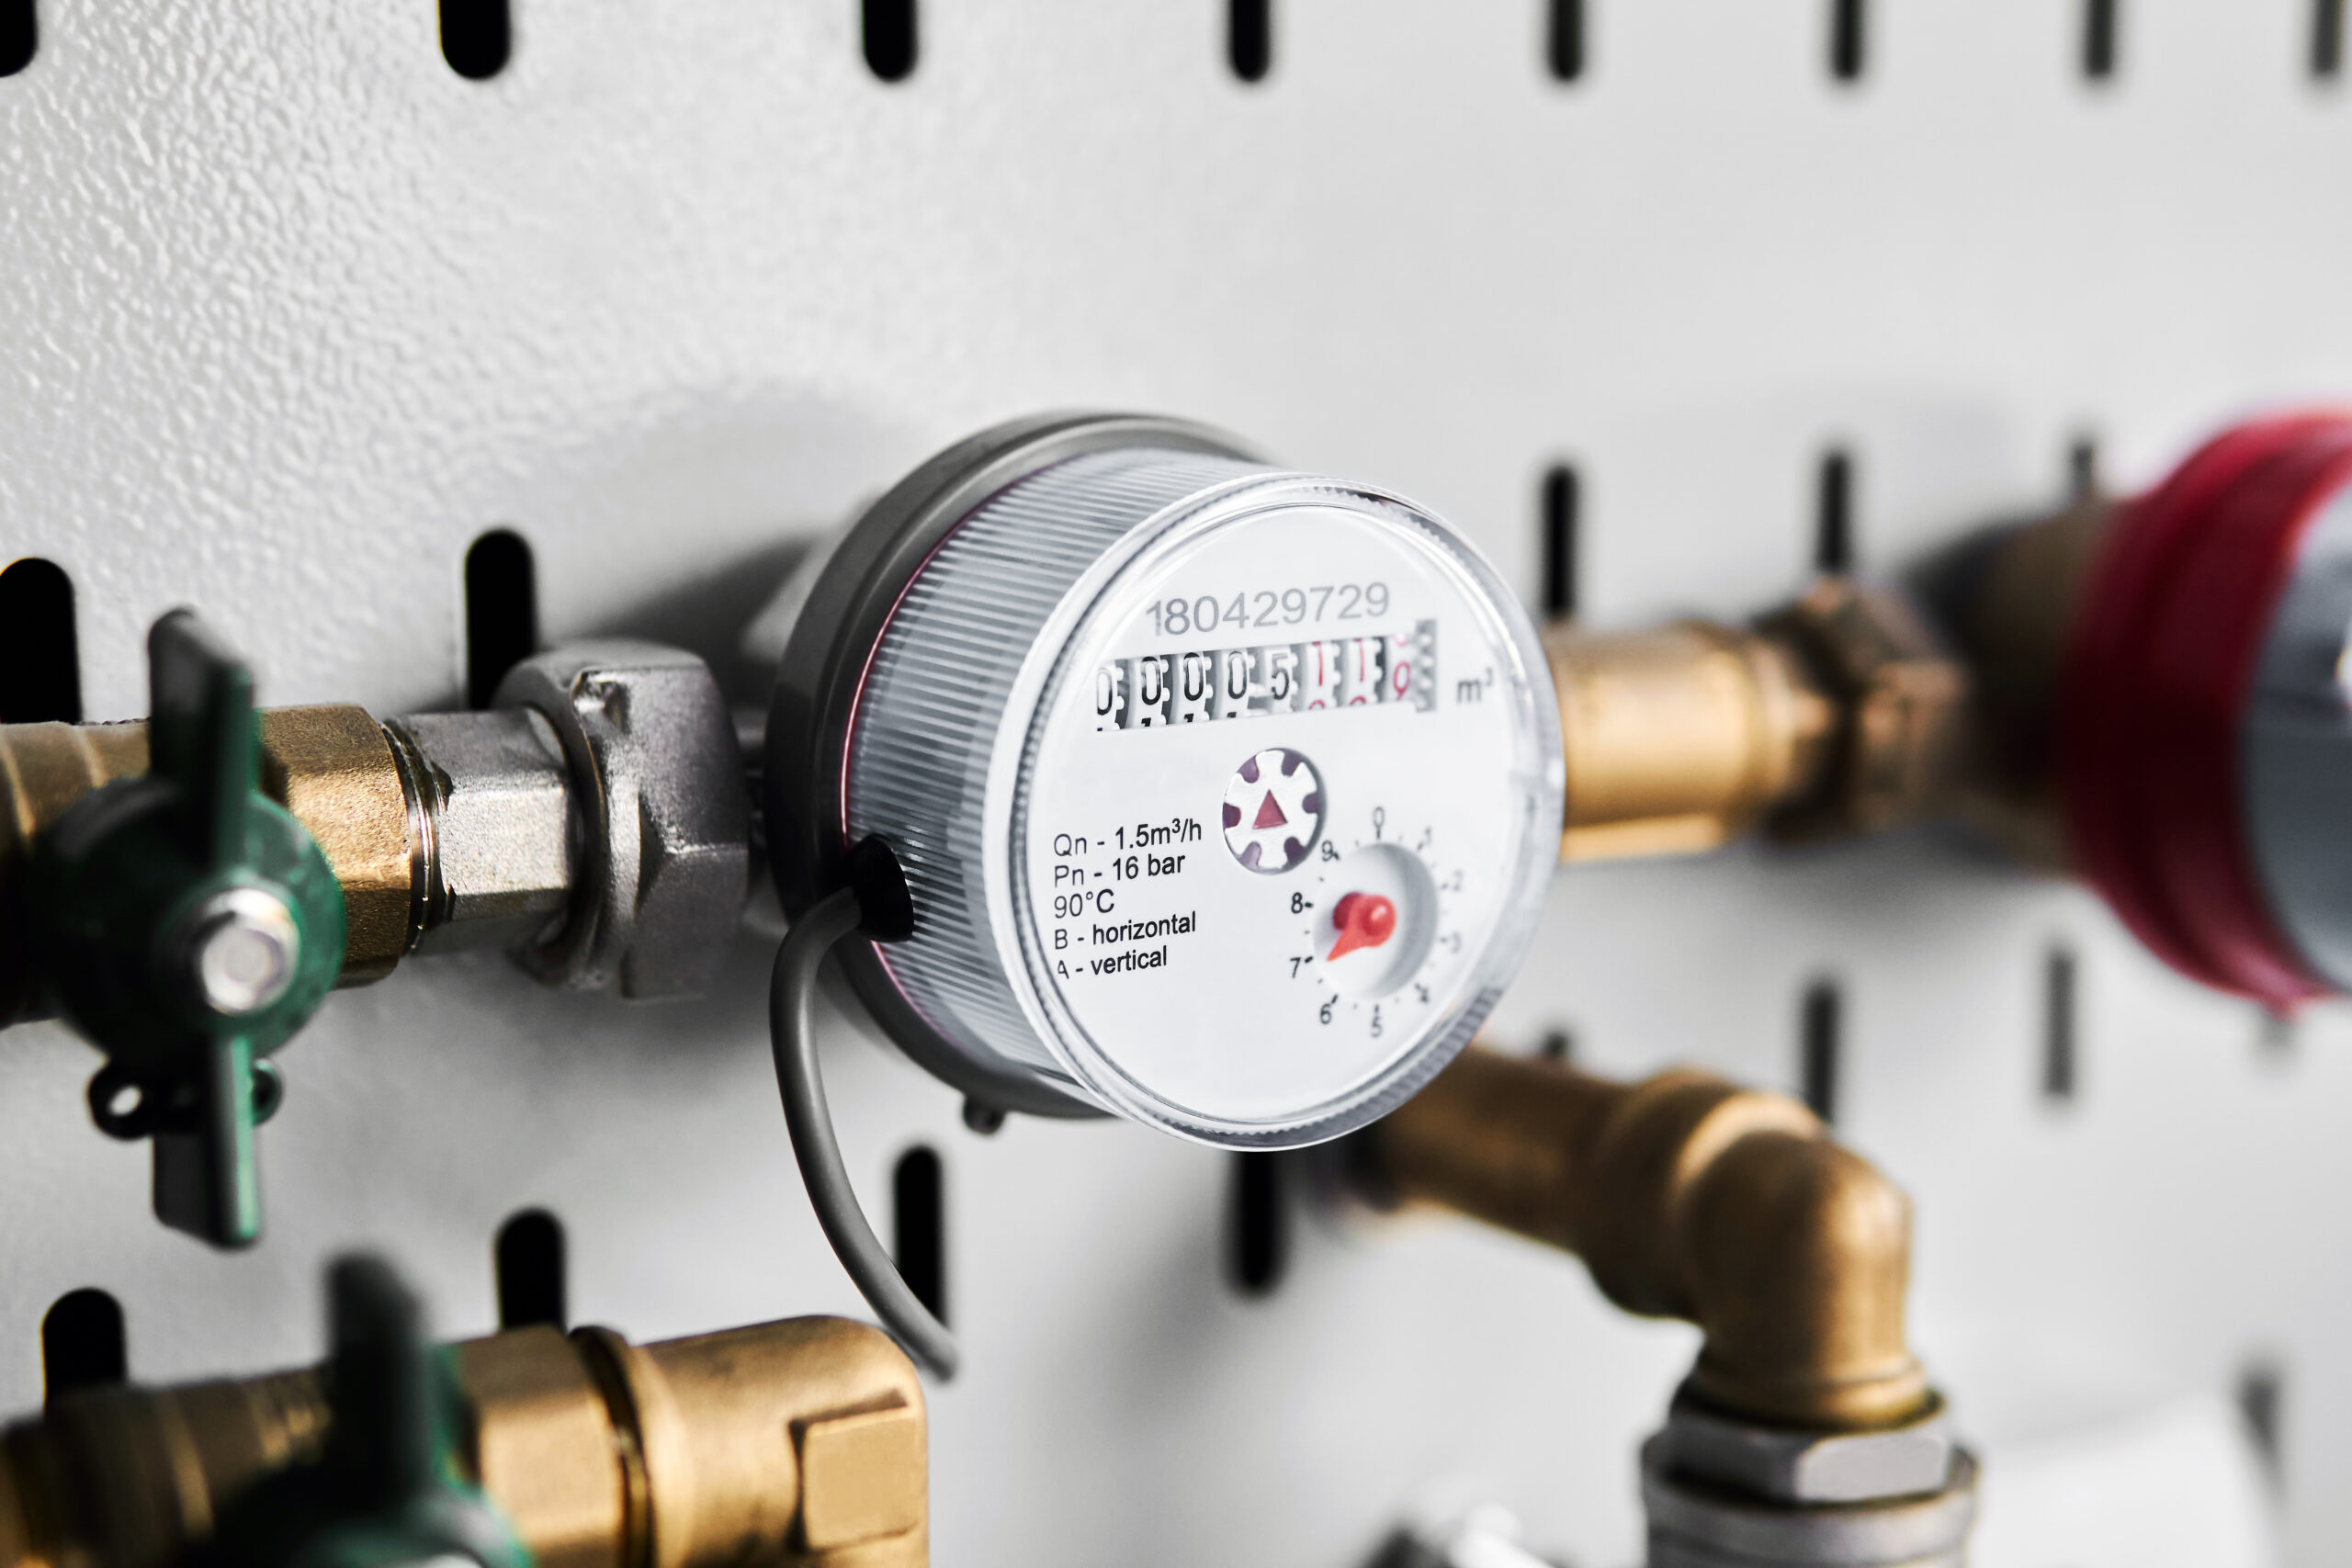 How Much Do You Know about the Water Meter in Your Home?